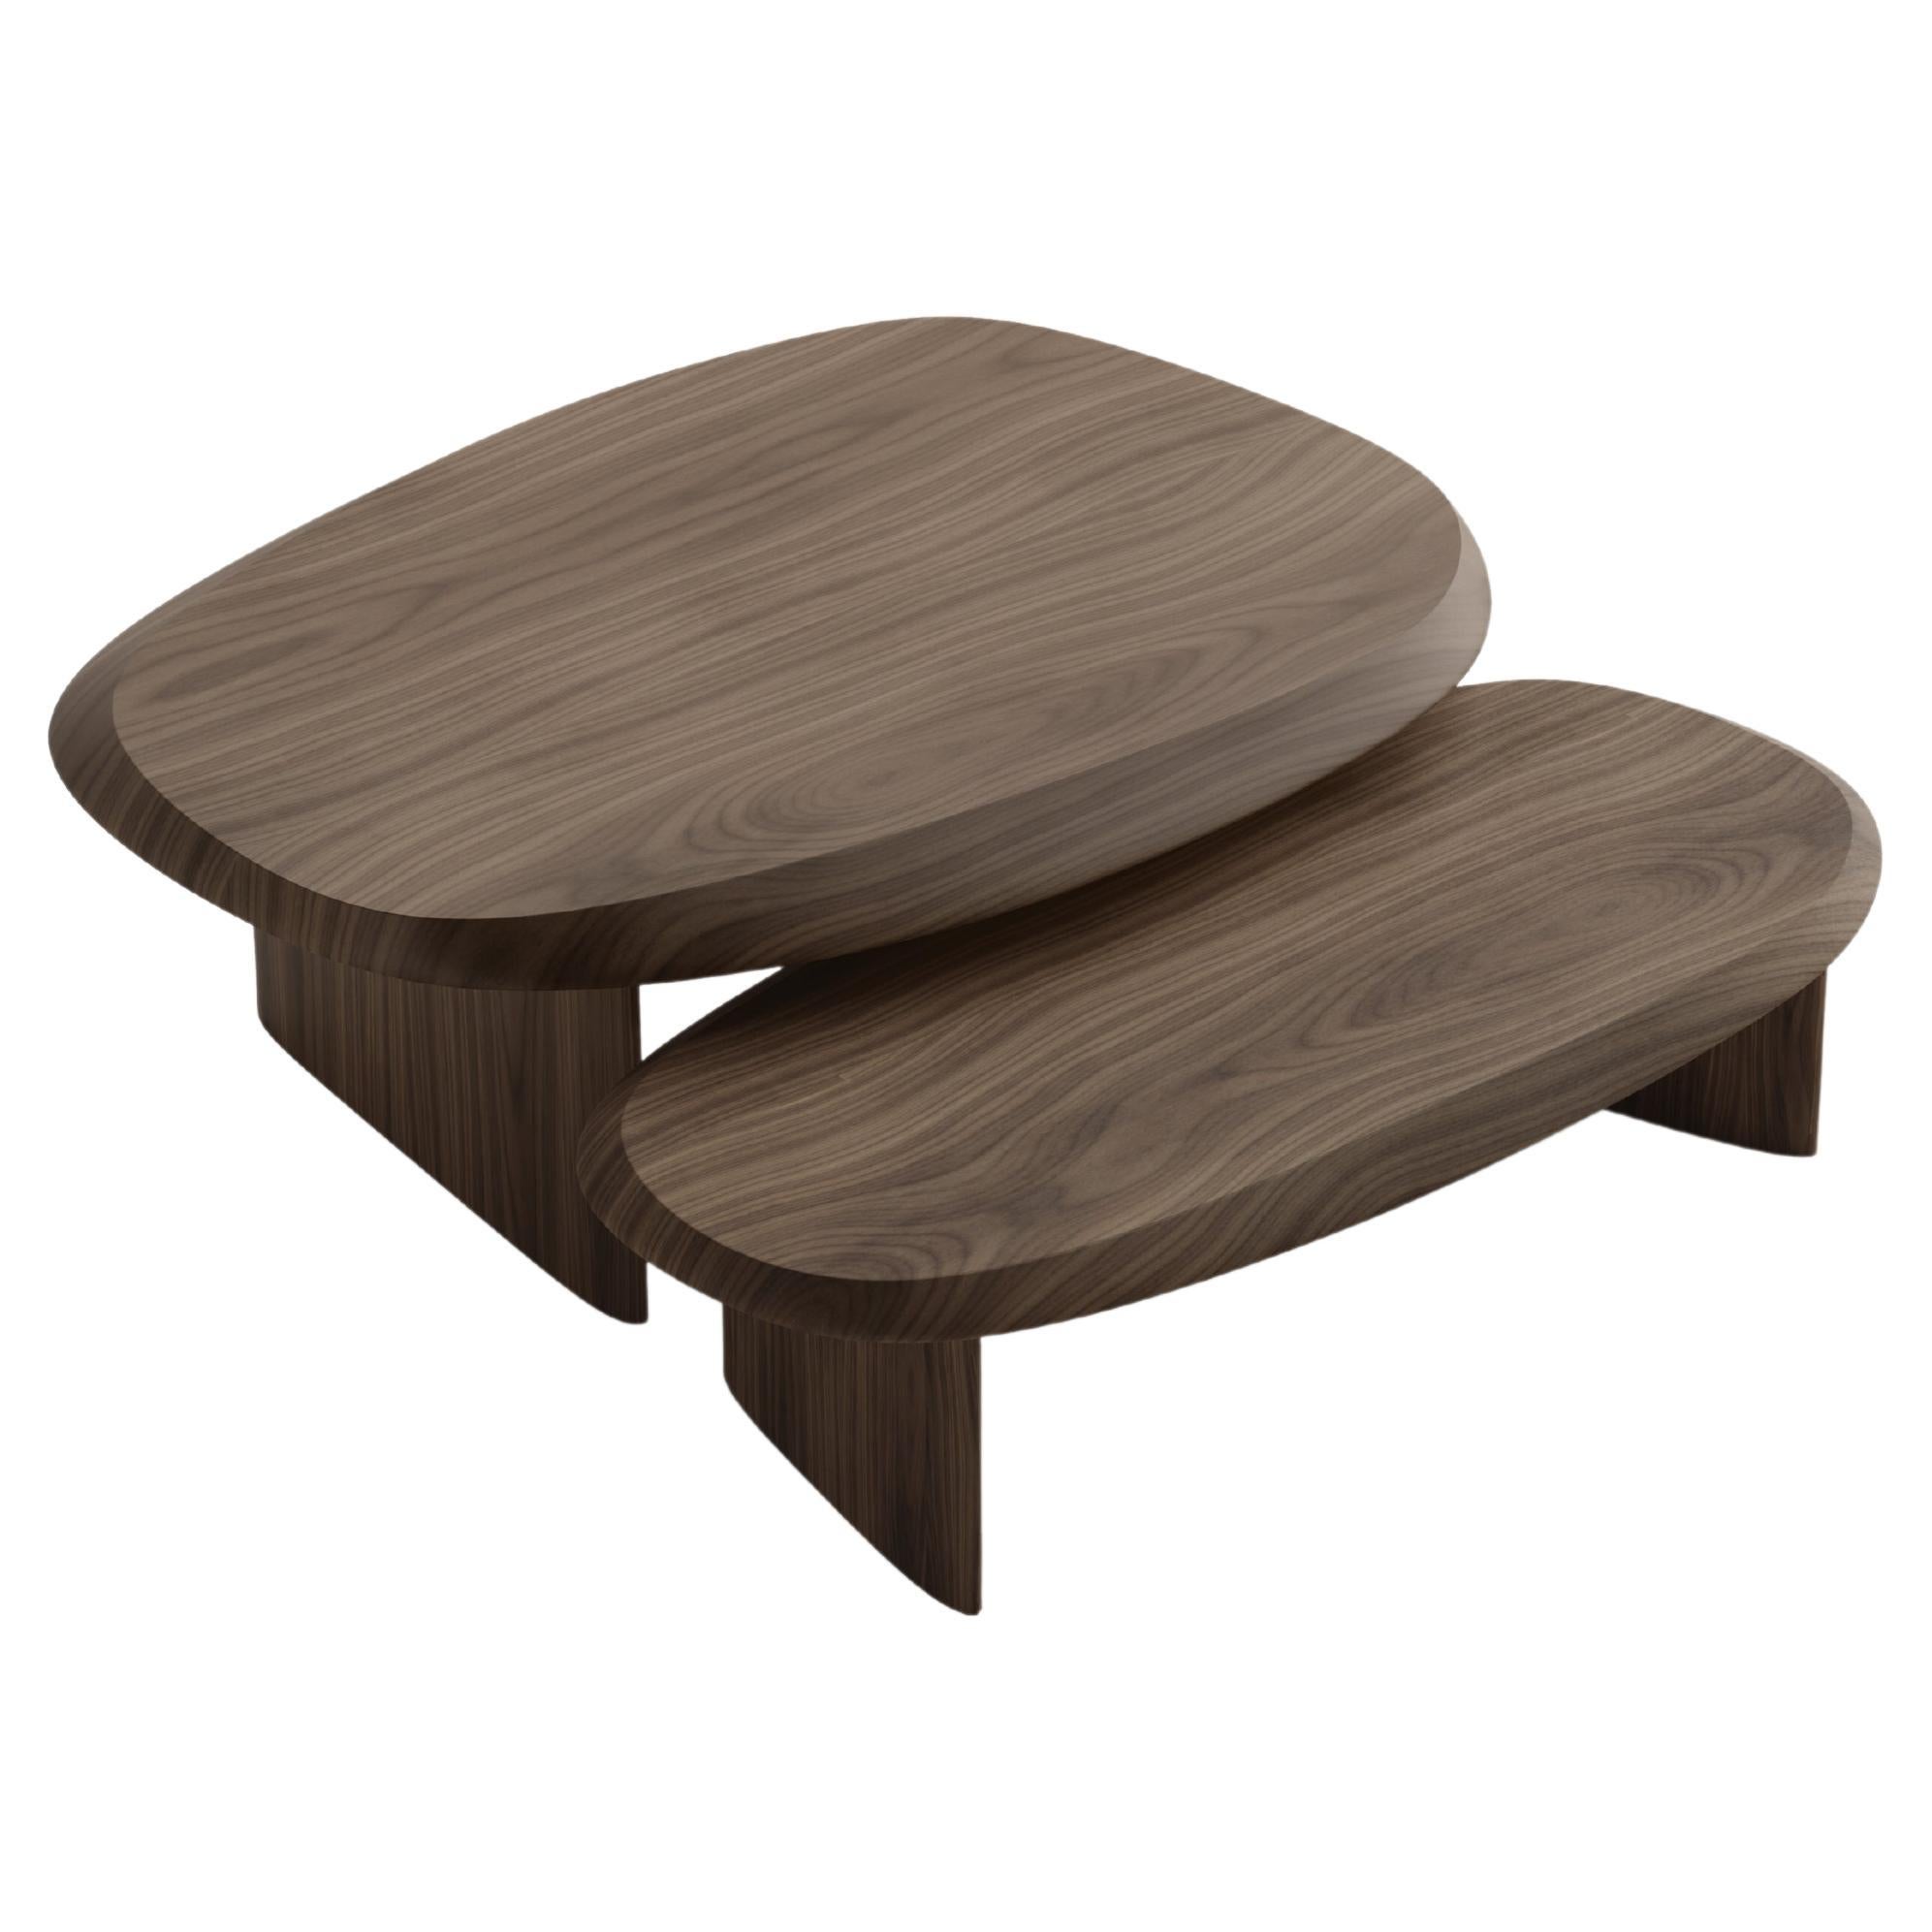 Set of 2 Duna Coffee Tables in Solid Walnut Wood, Coffee Table by Joel Escalona For Sale